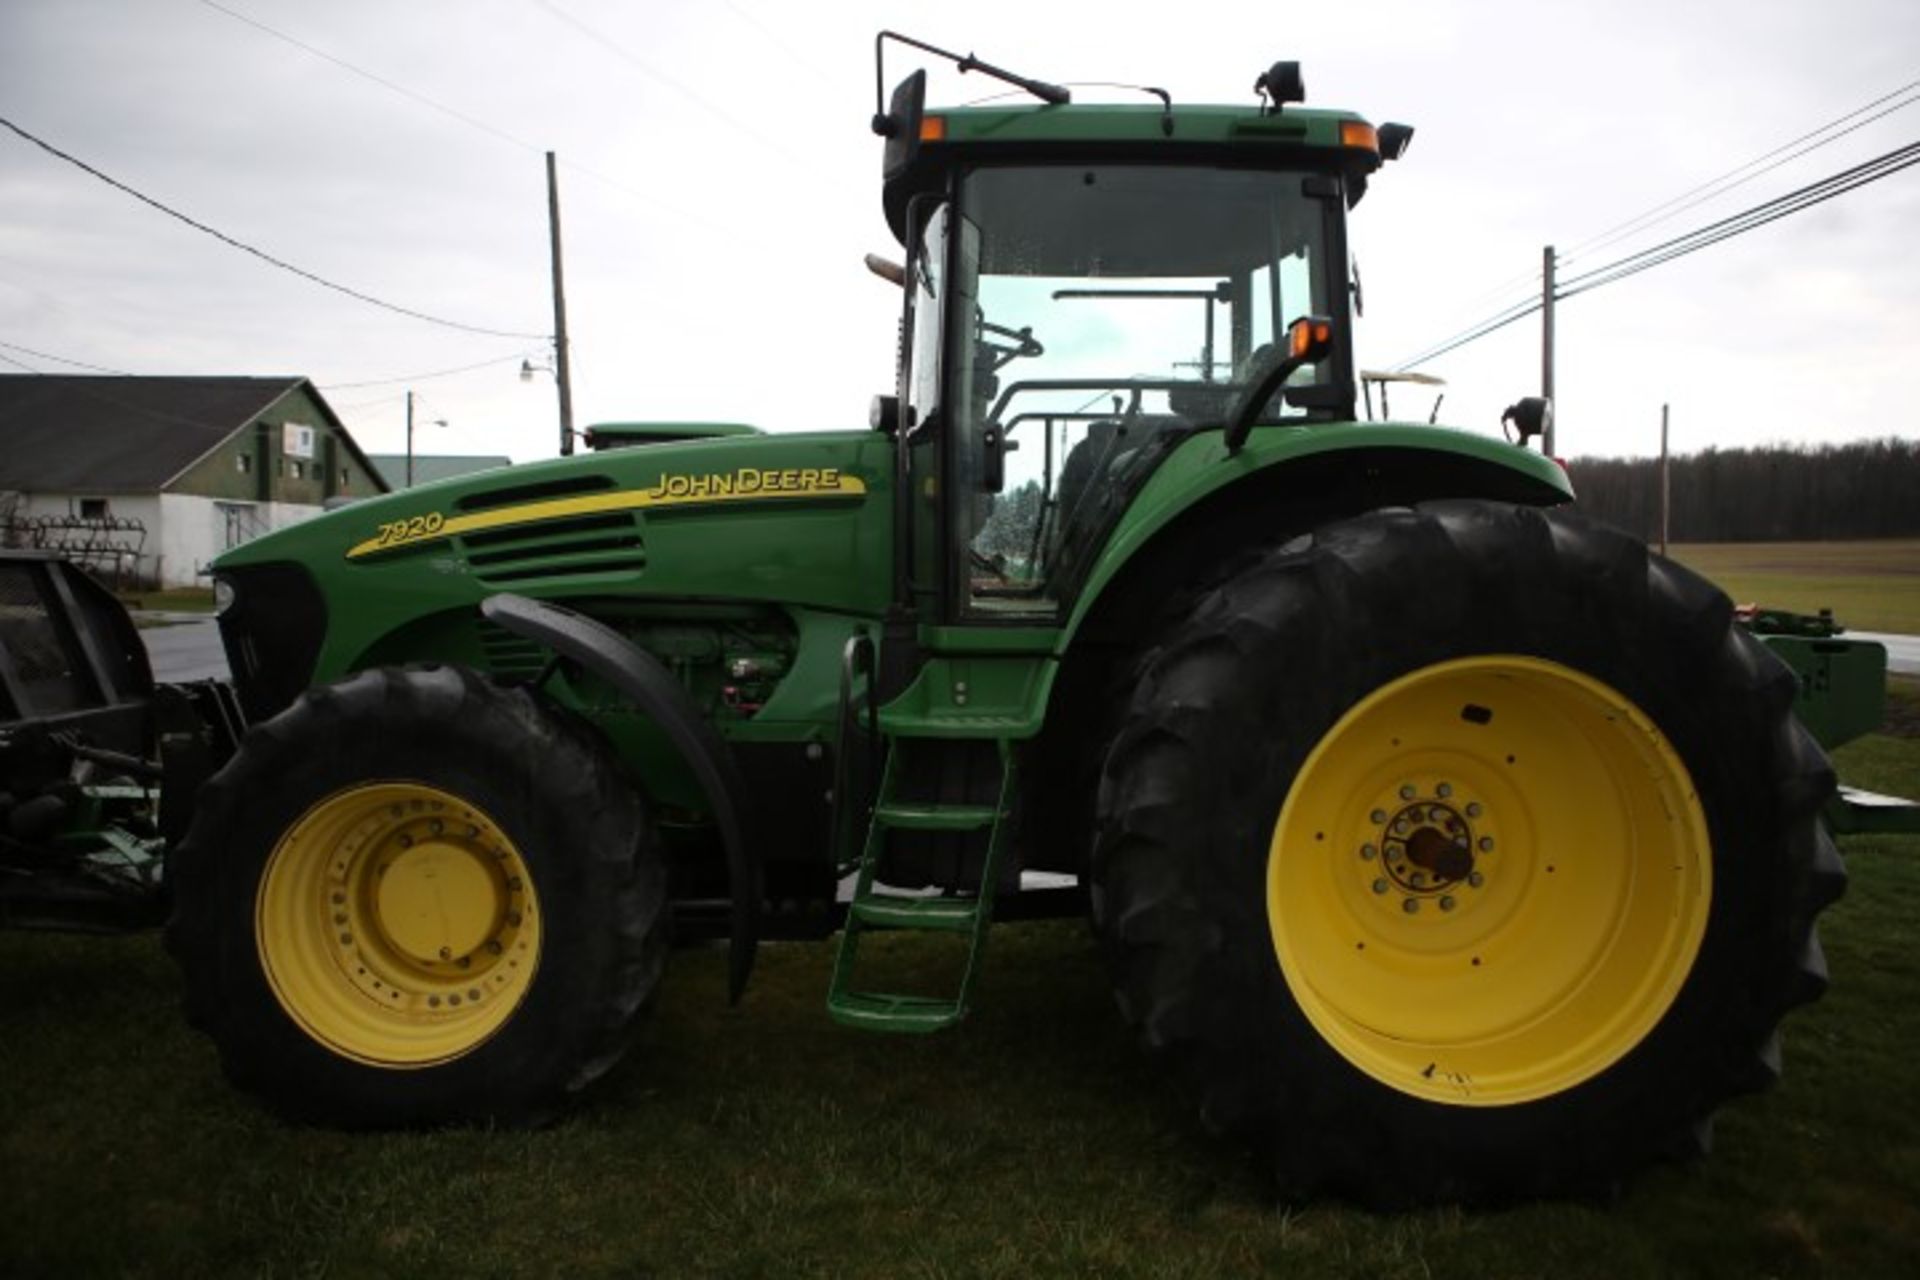 05 JD 7920 W/GROUSER 2100 12' SILAGE BLADE, 4WD, 4,500 HRS, W/ 20.8R42 DUALS, IVT,REVERSER, REAR - Image 6 of 12